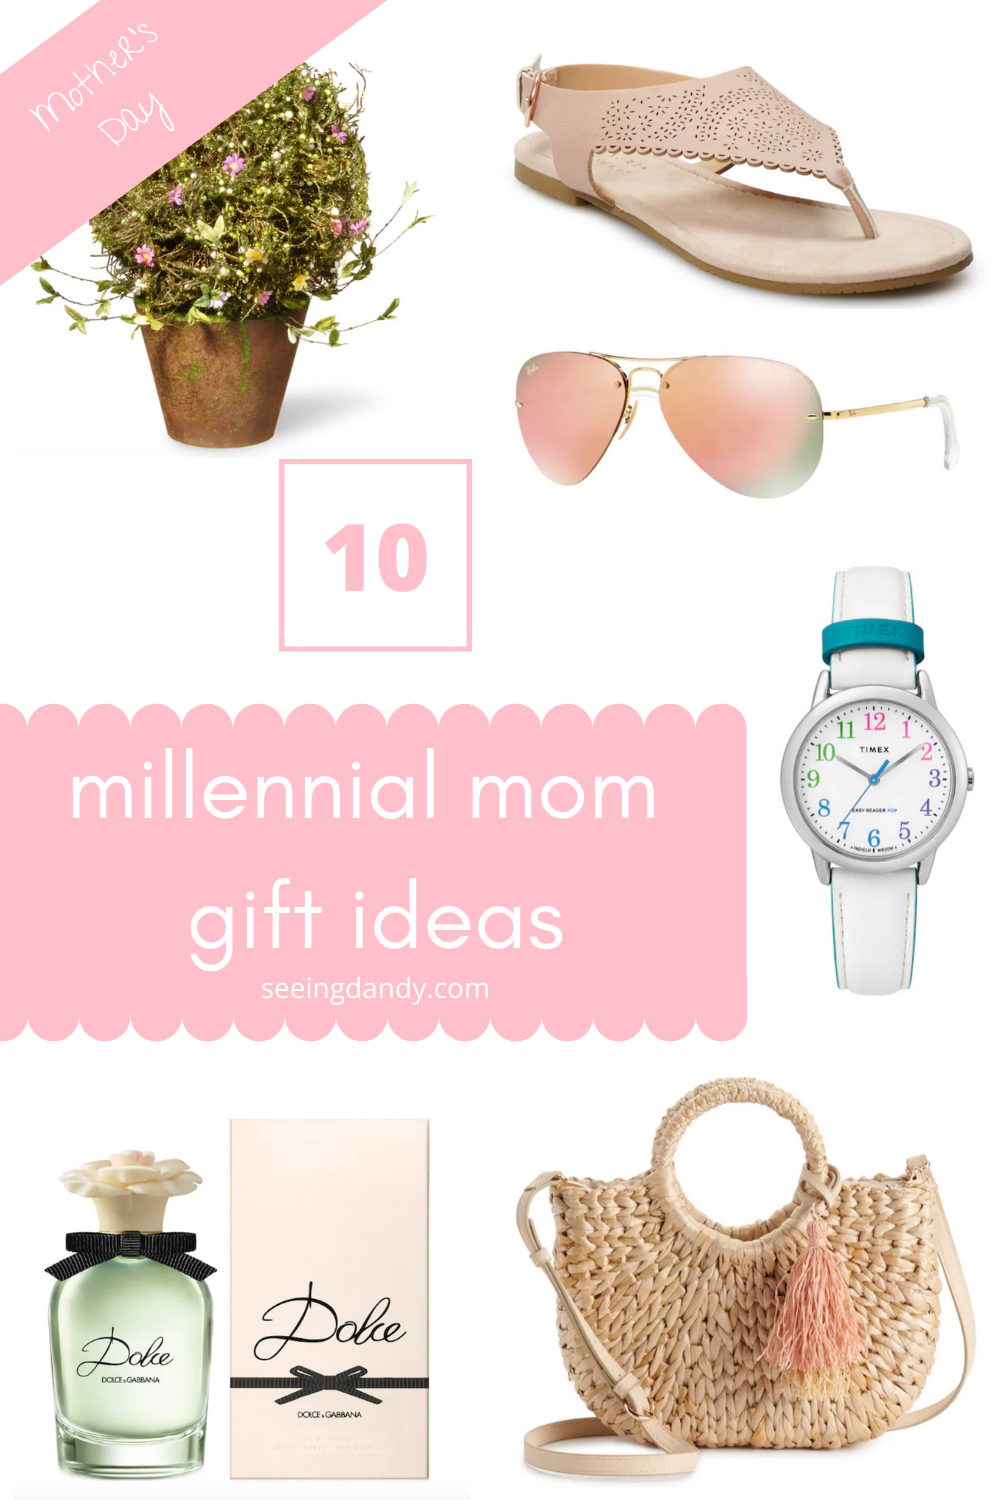 10 best millennial mom gift ideas for Mothers Day